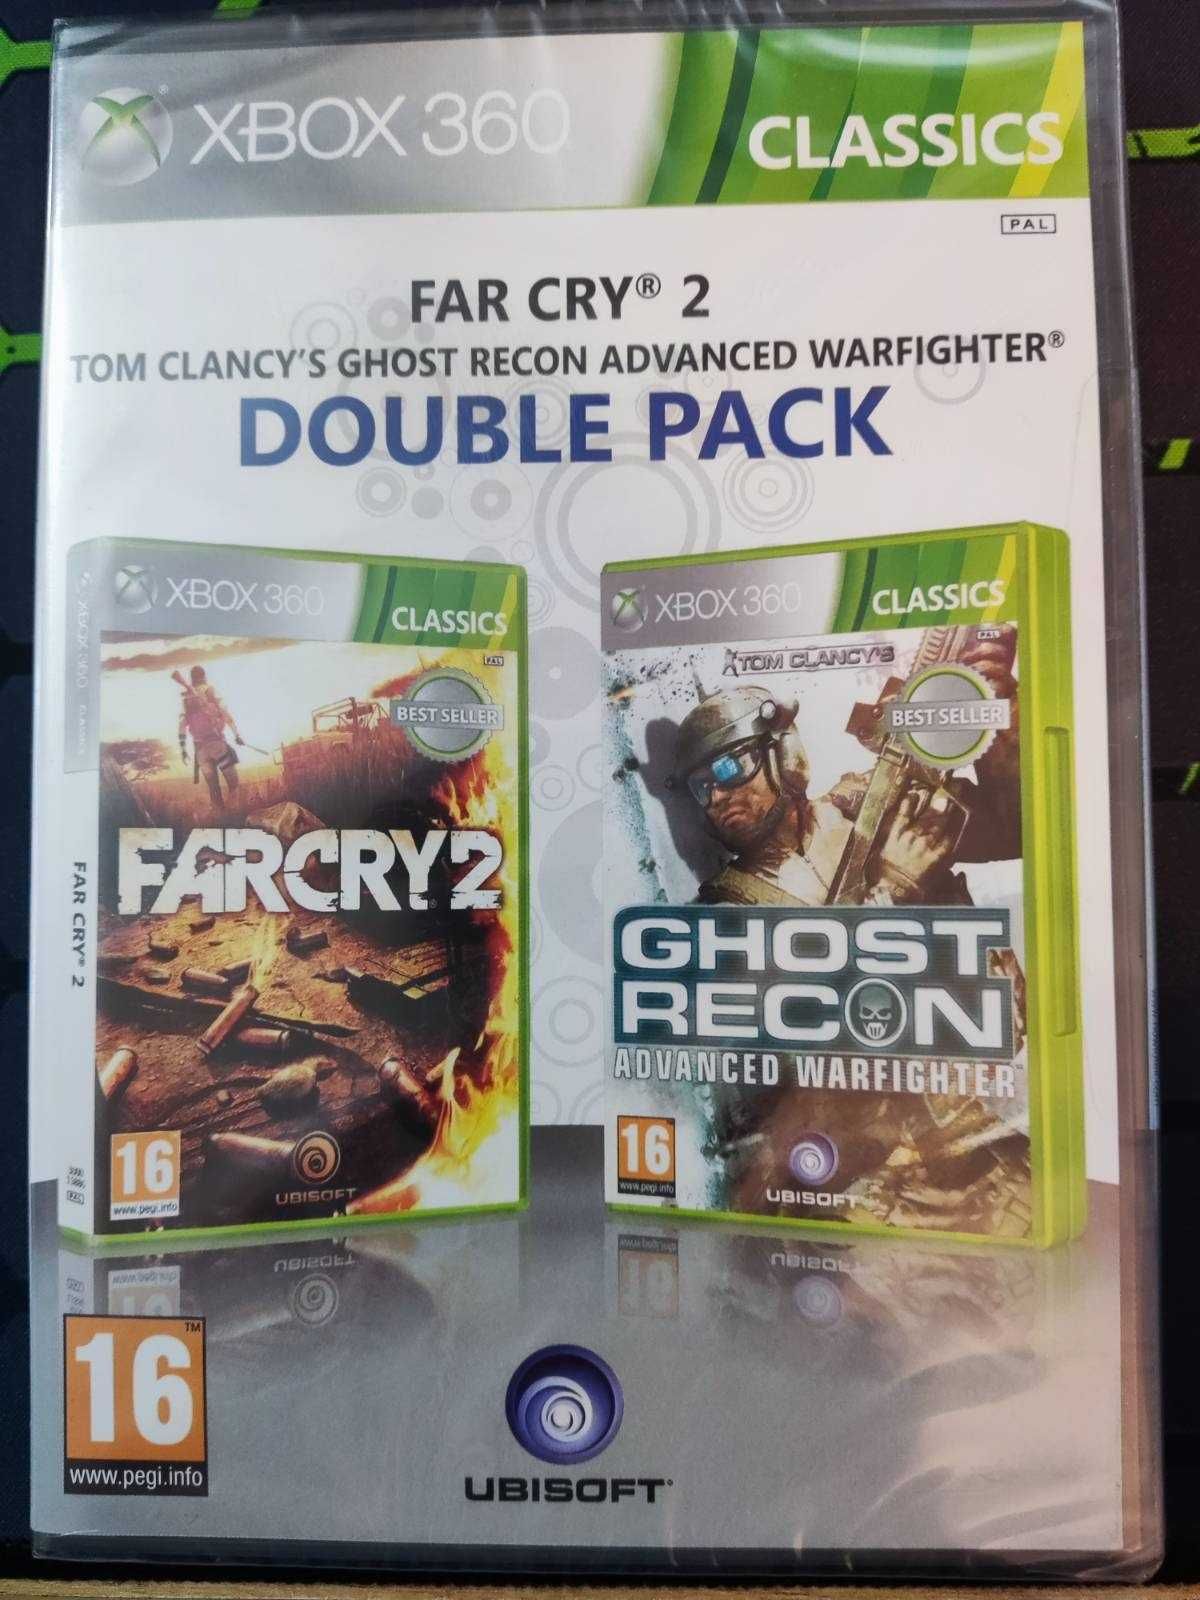 Far Cry 2 Ghost Recon Double Pack Xbox 360 Nowa w folii